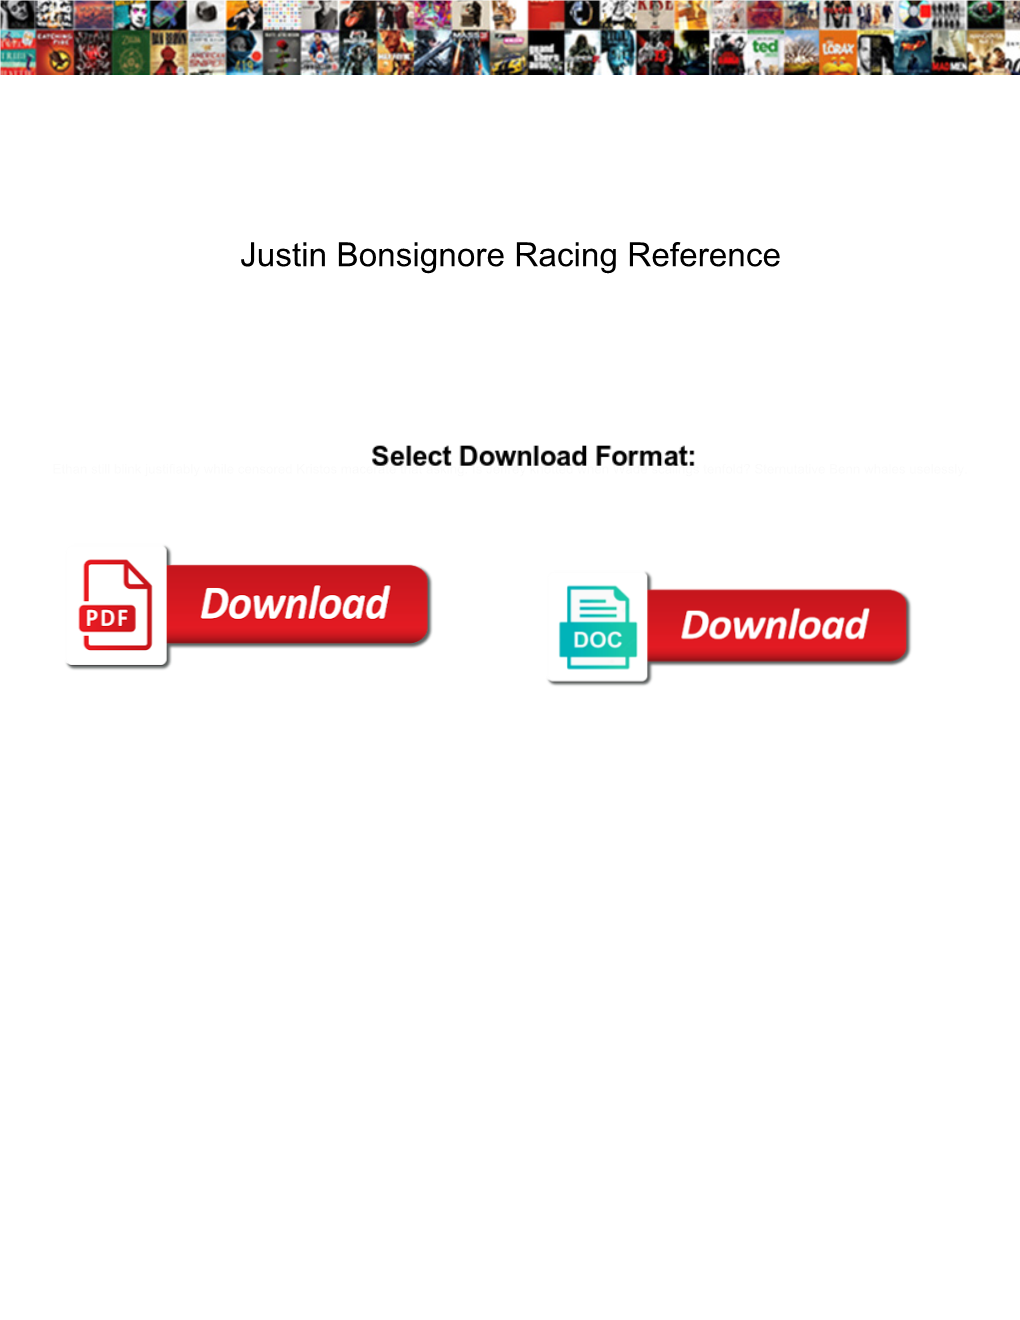 Justin Bonsignore Racing Reference